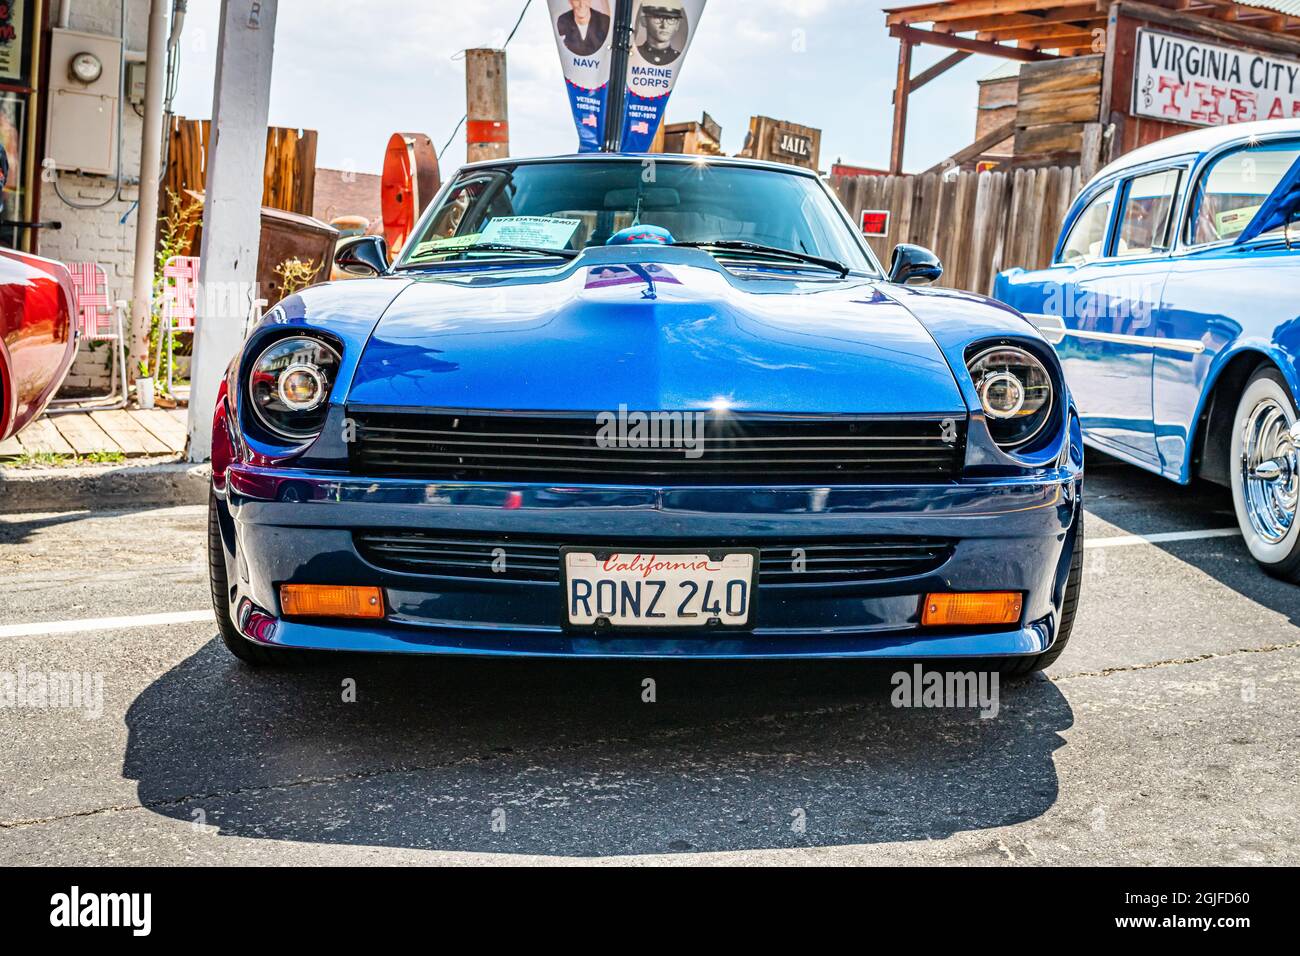 Virginia City, NV - July 30, 2021: 1973 Datsun 240Z coupe at a local car show. Stock Photo